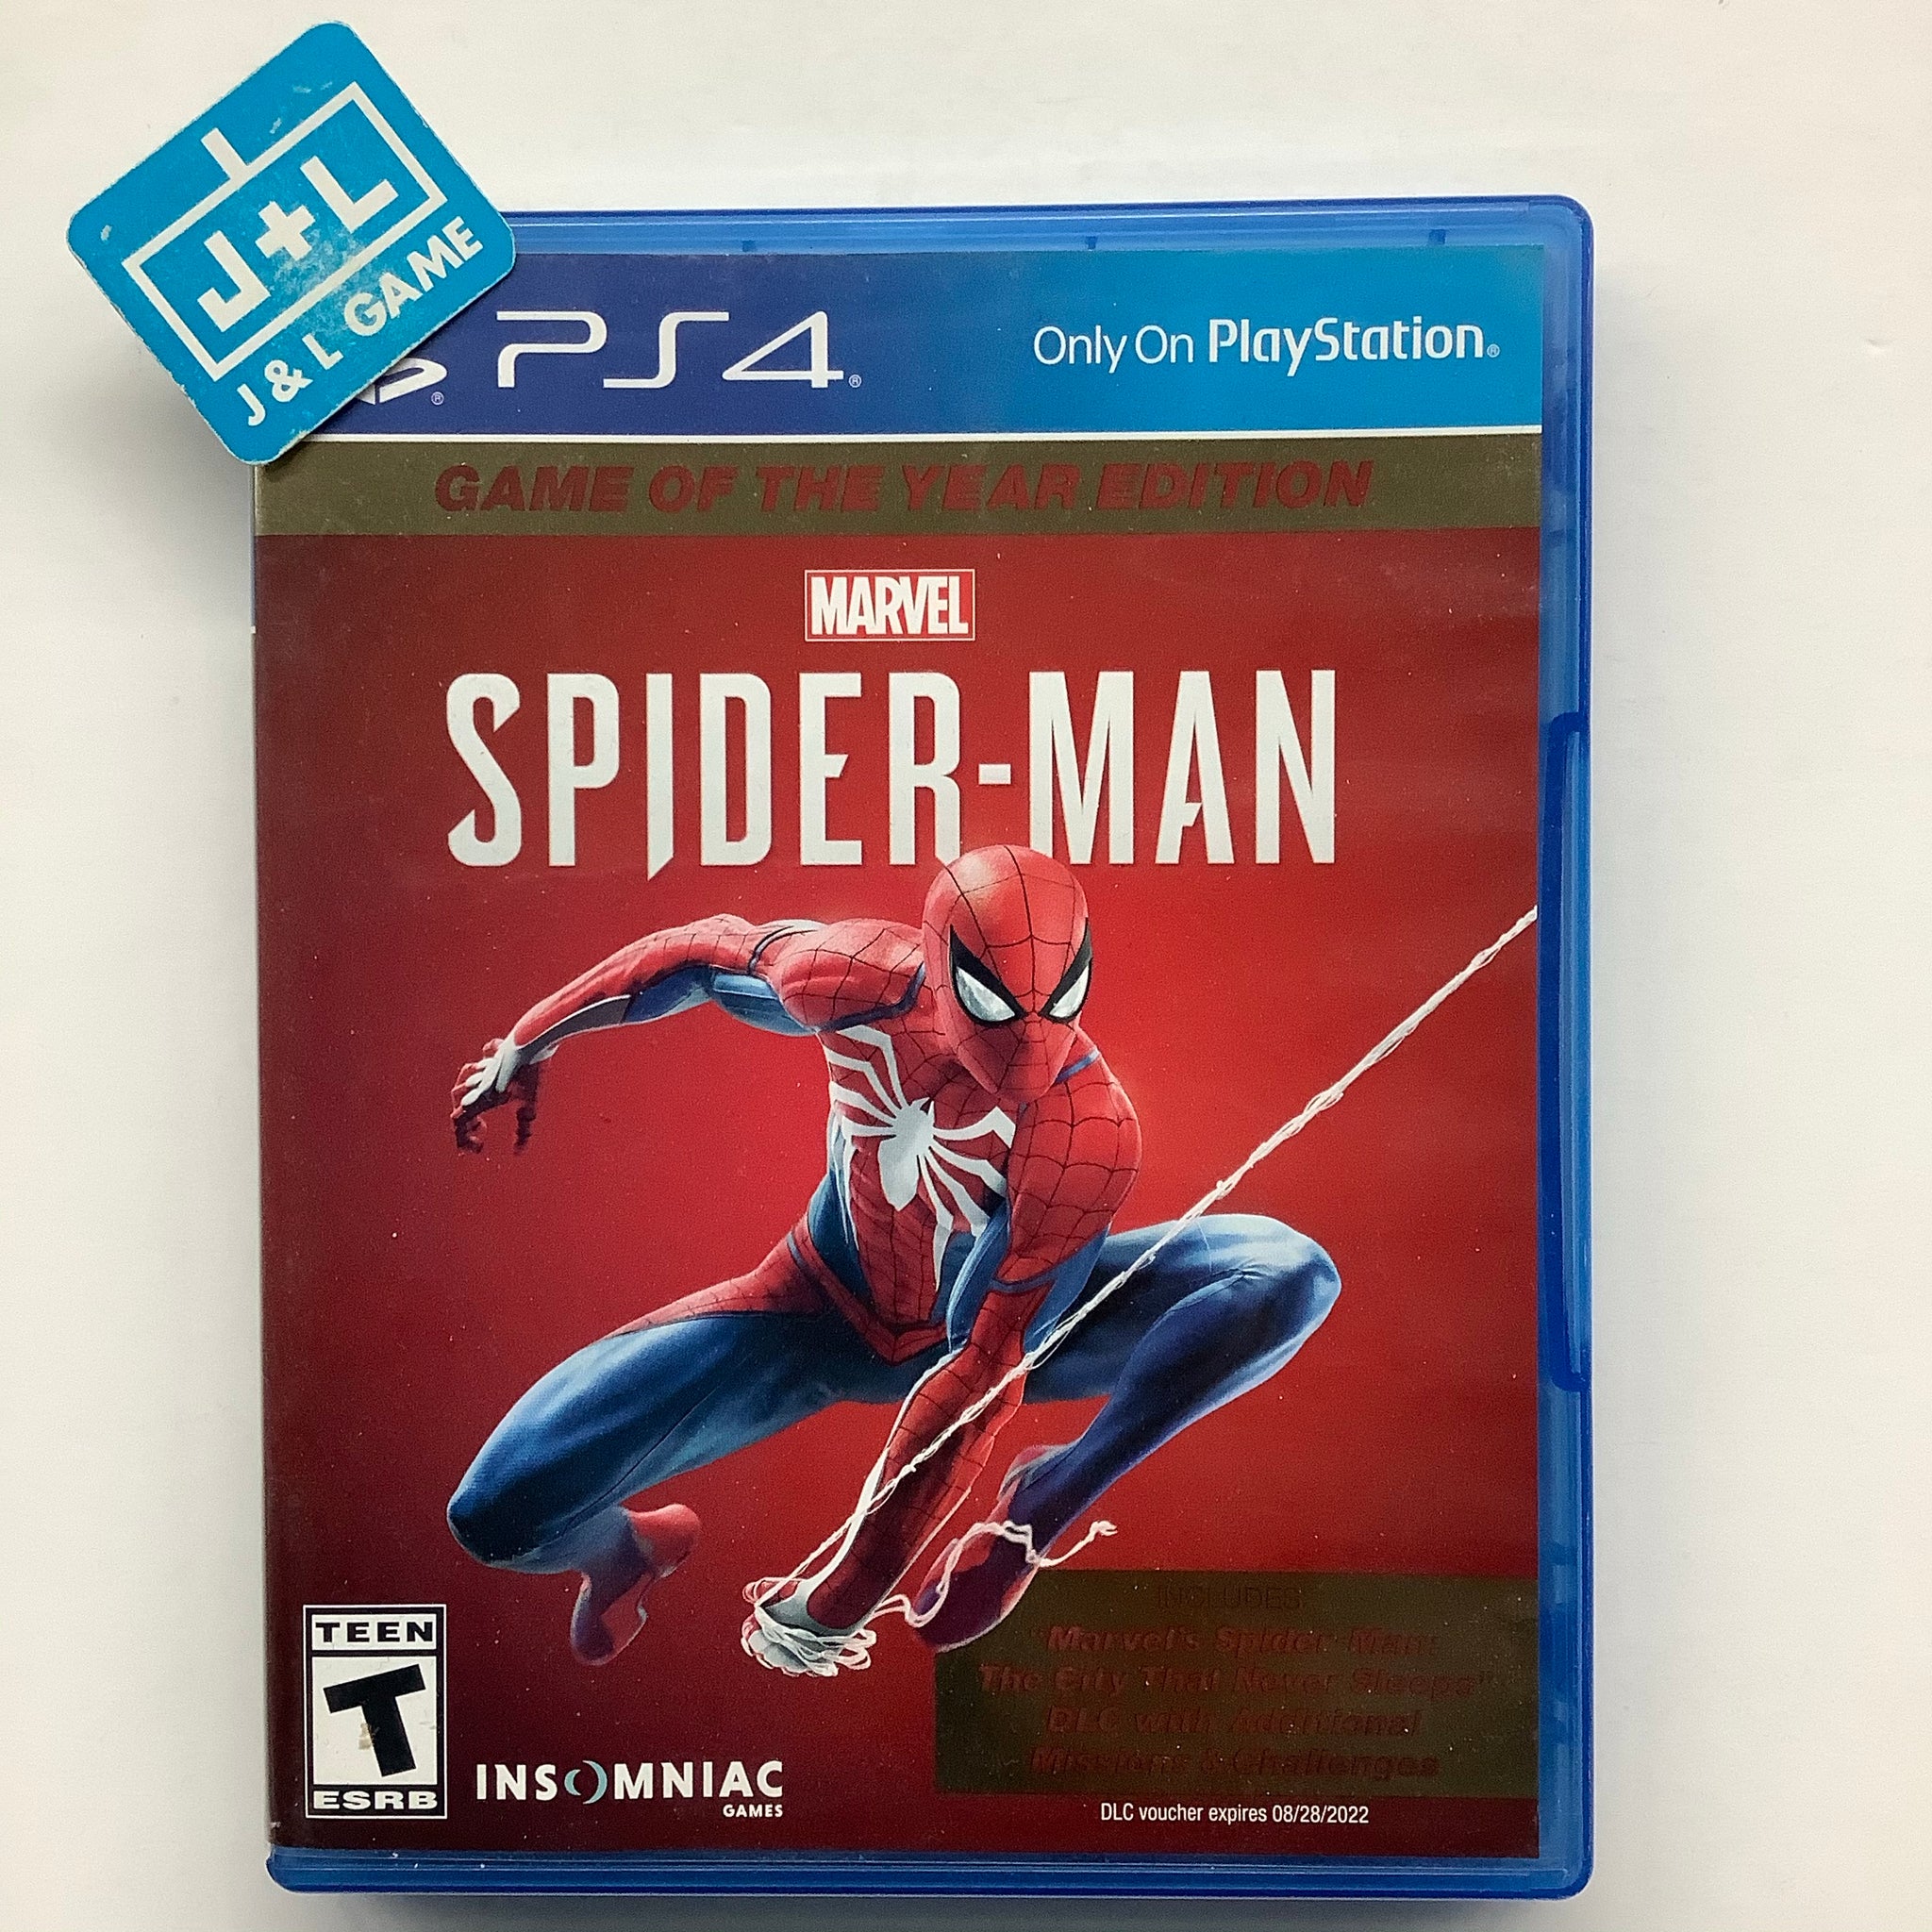 Spider-Man Games for PS3 